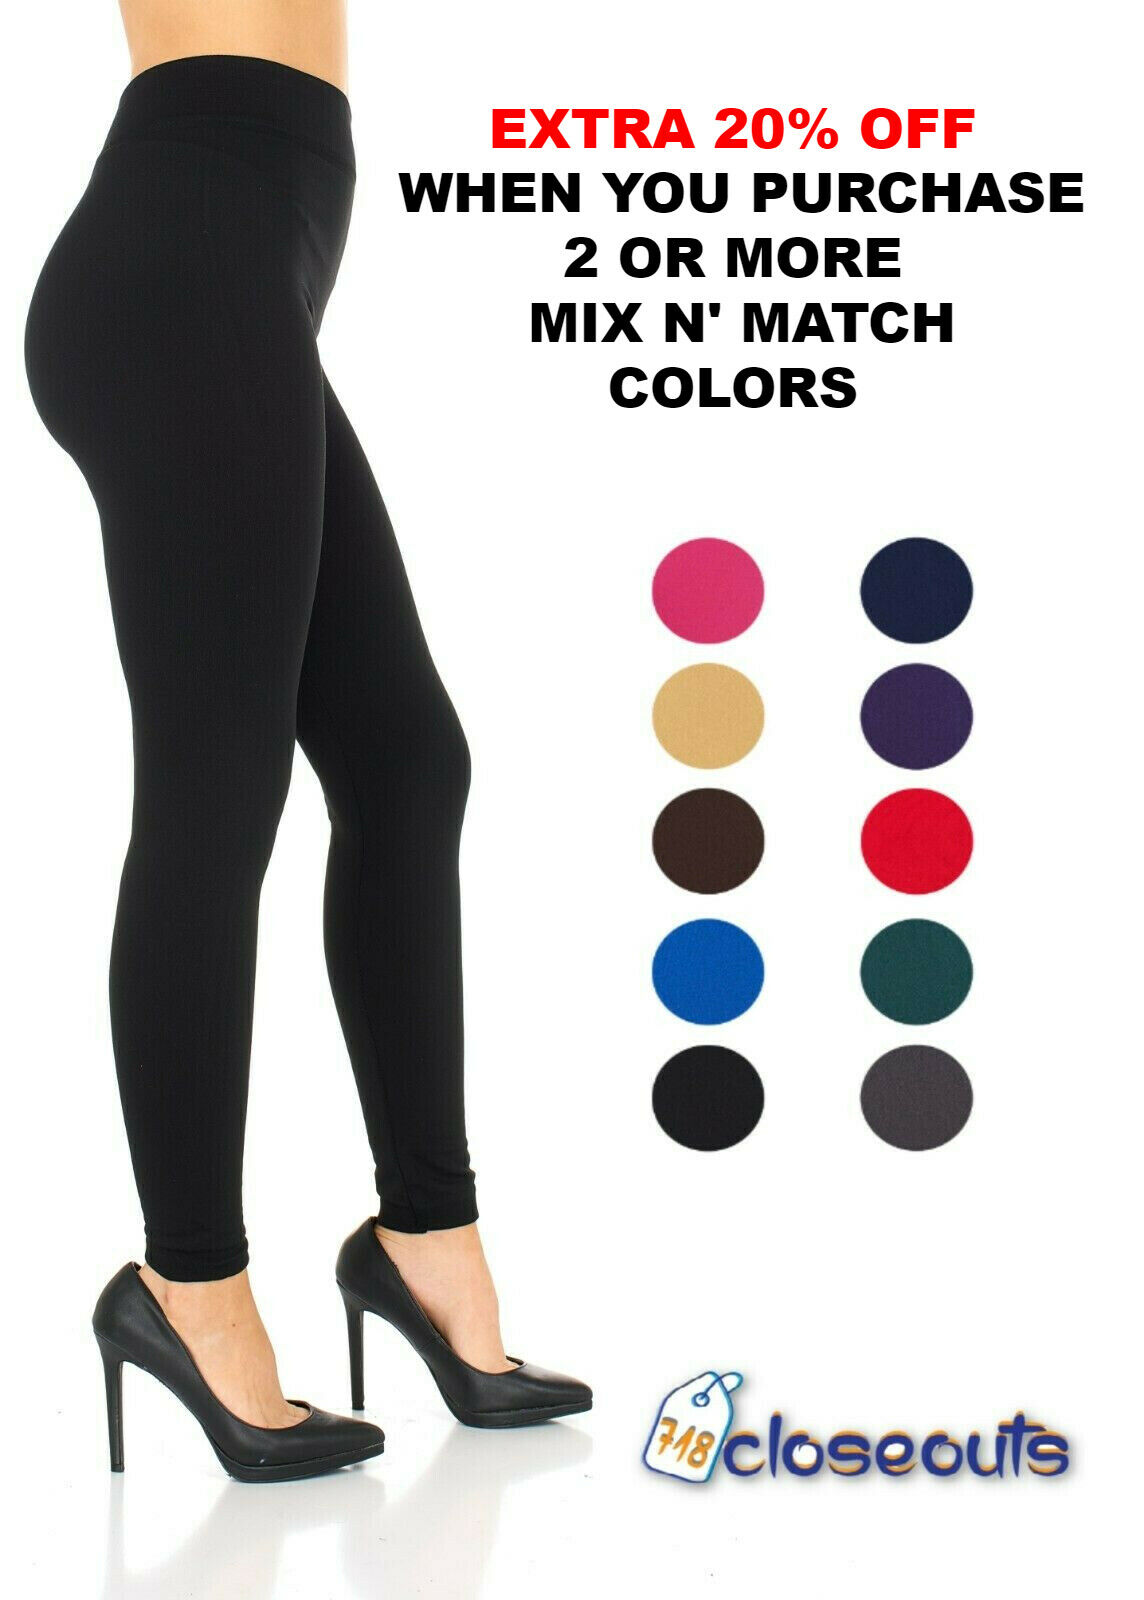 Women's Fleece Lined Leggings Solid Colors Winter Thick Warm Thermal Stretchy